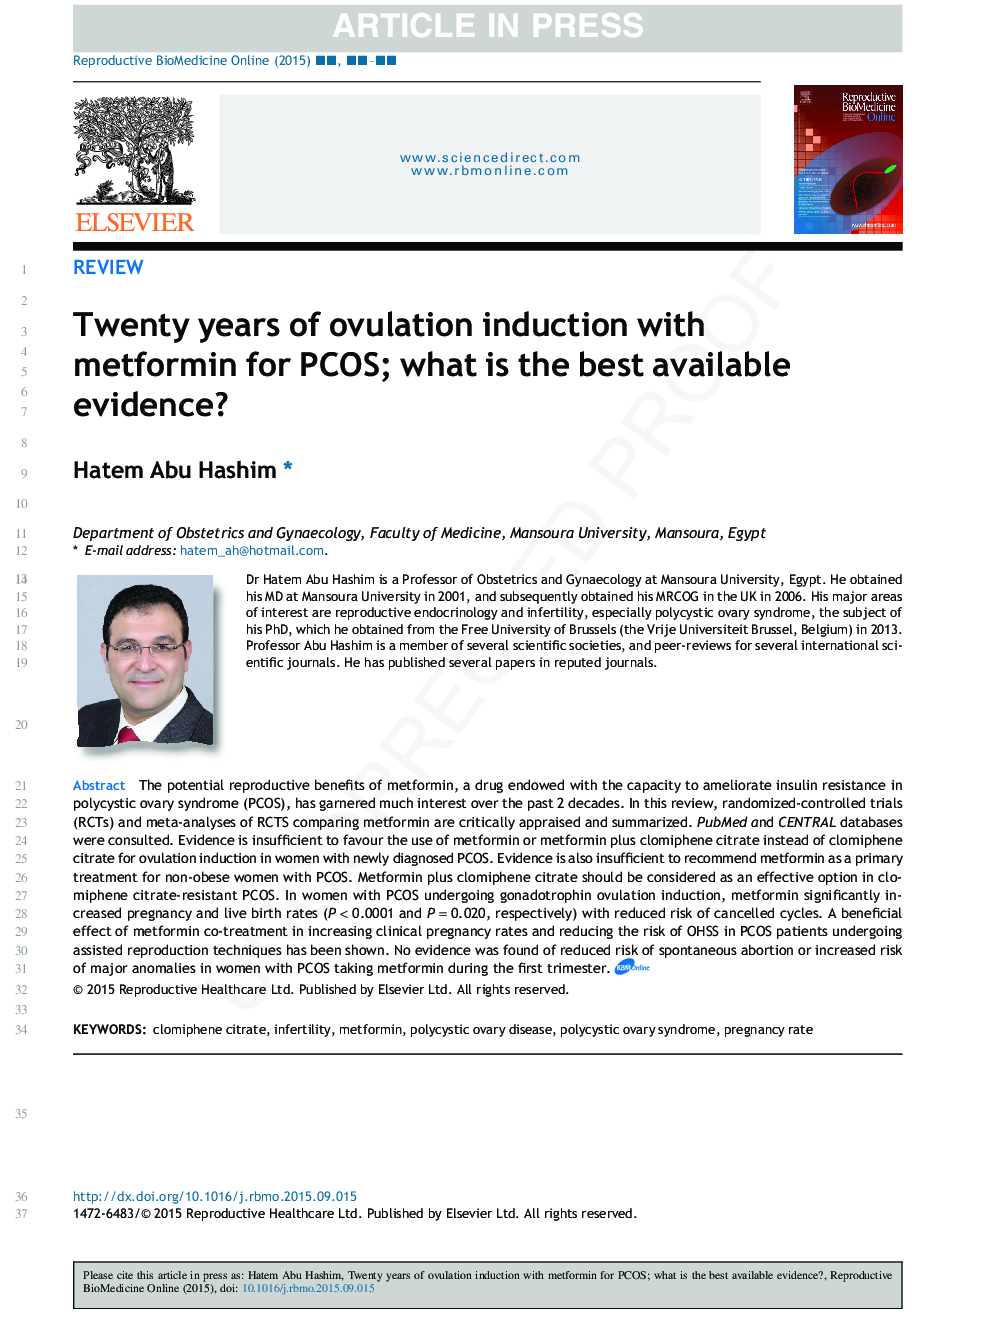 Twenty years of ovulation induction with metformin for PCOS; what is the best available evidence?